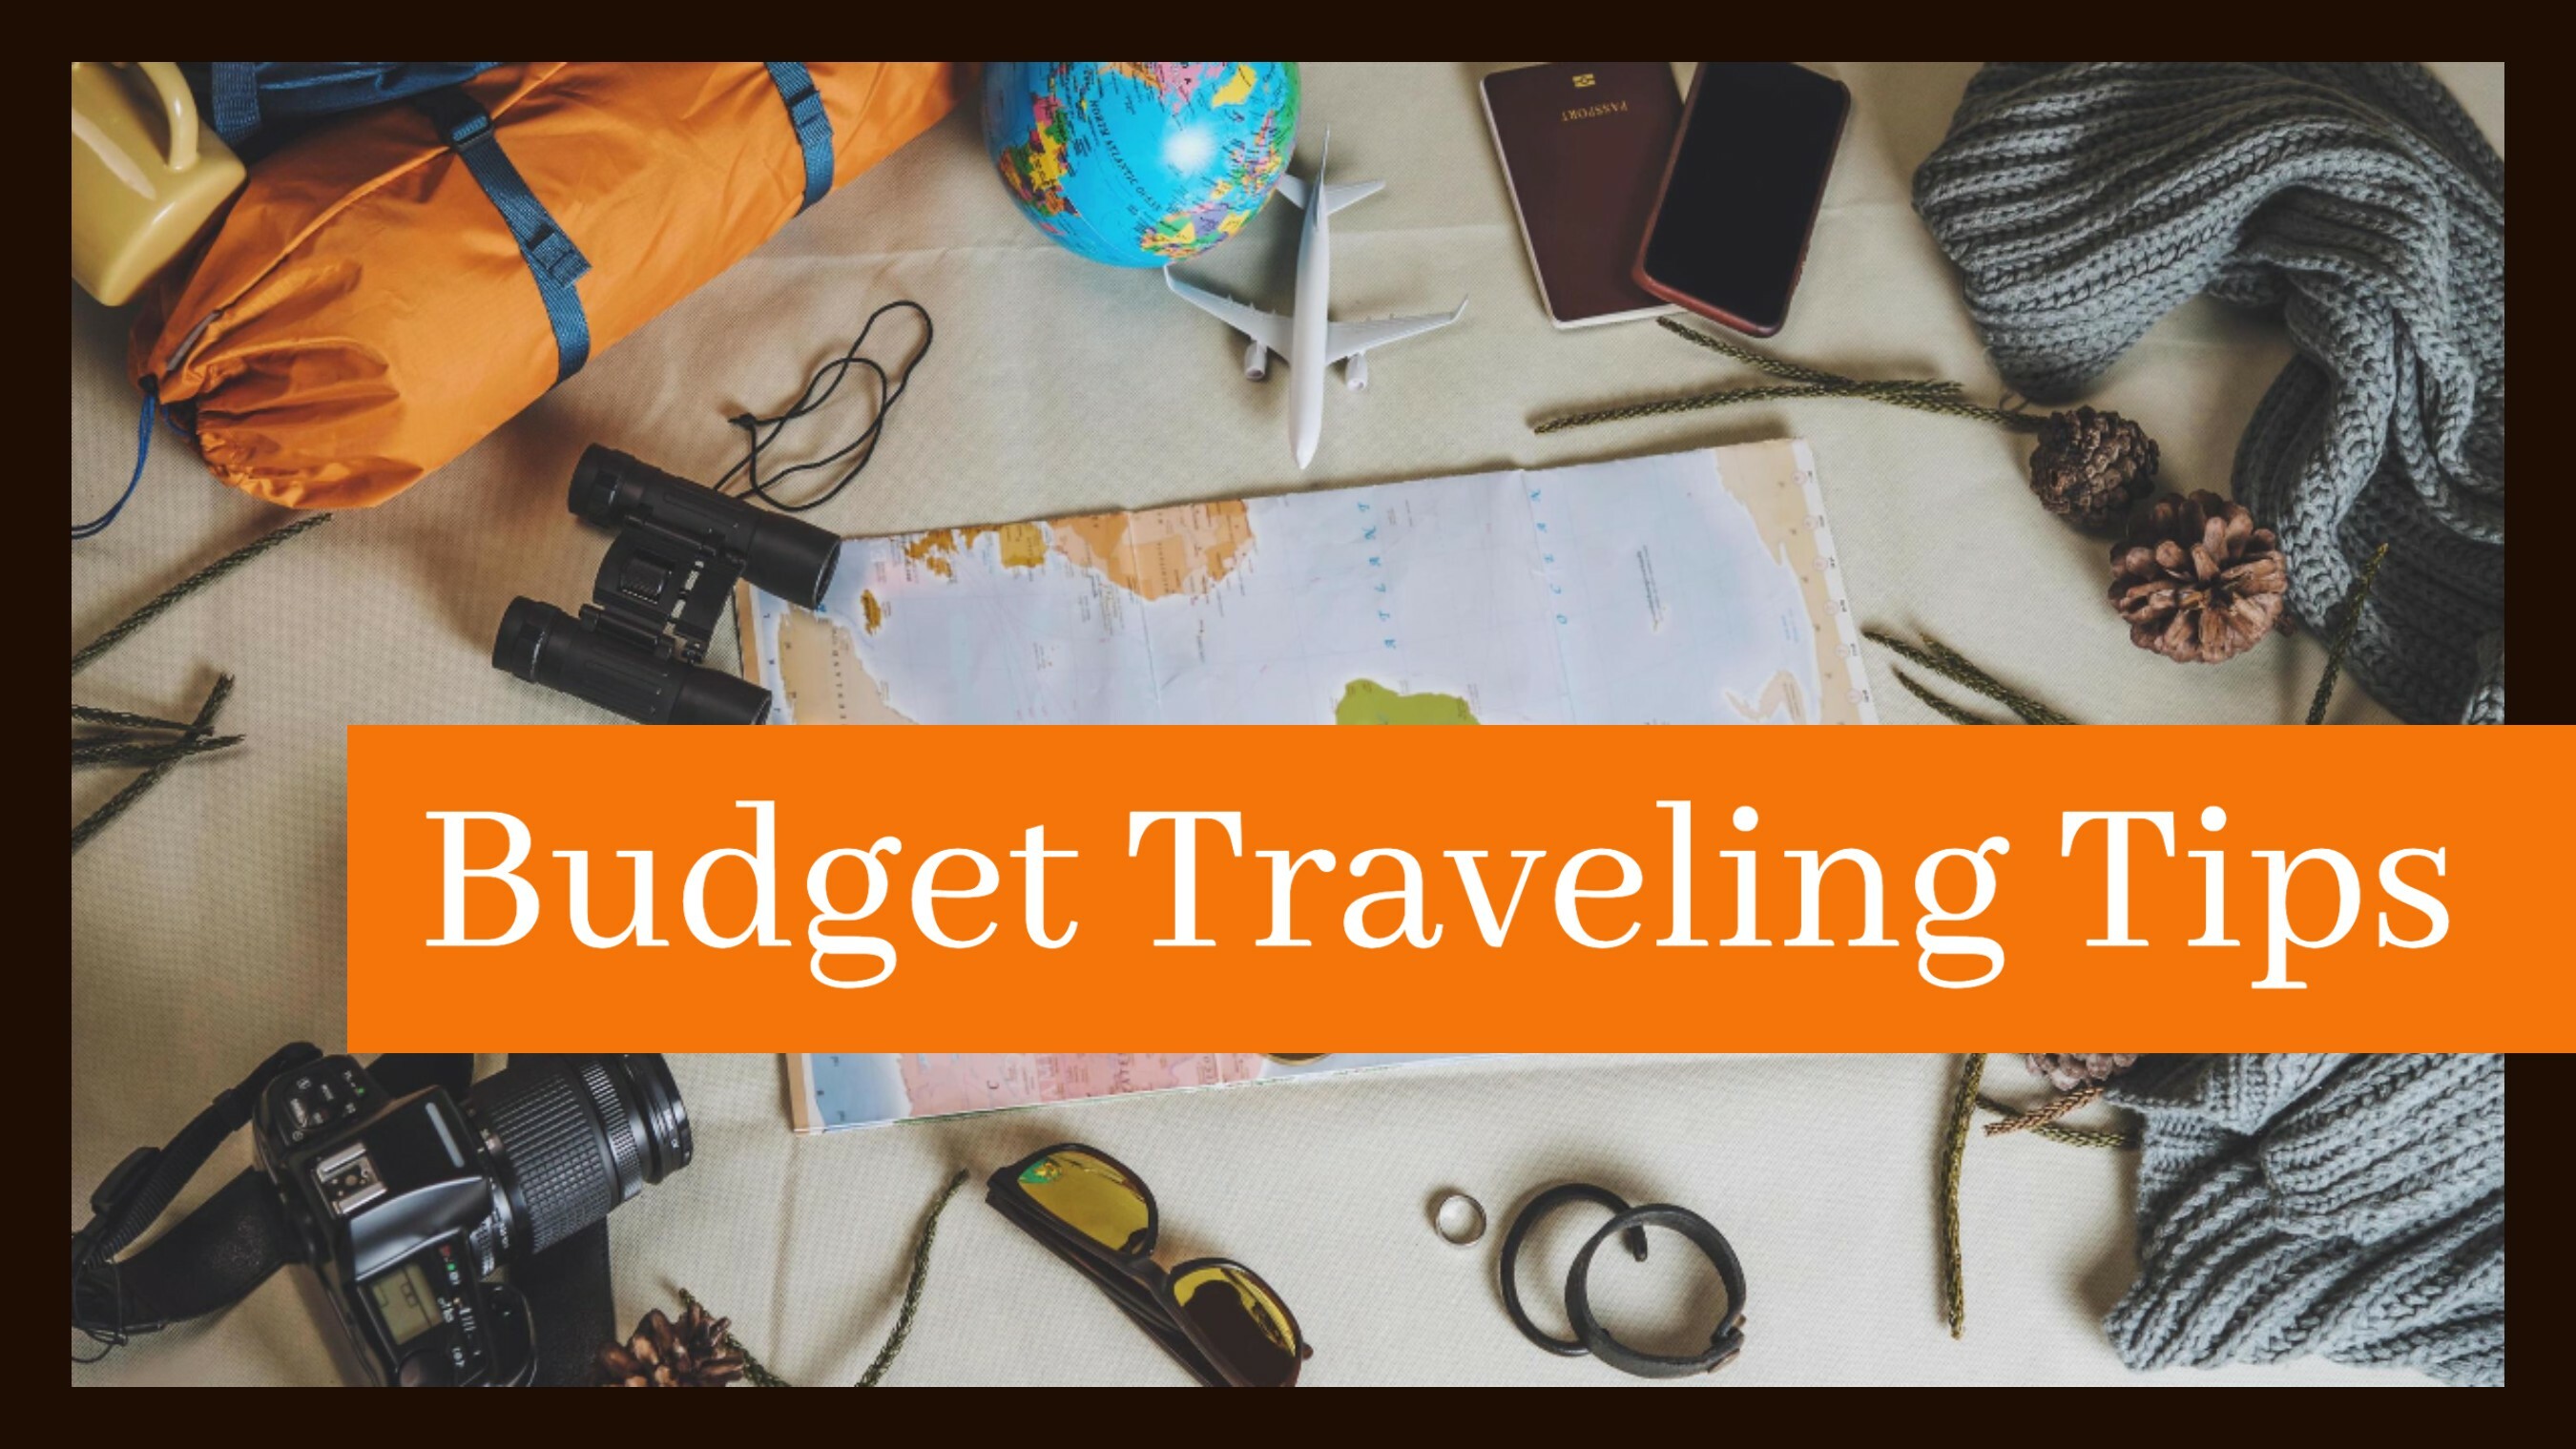 Budget Traveling Tips template